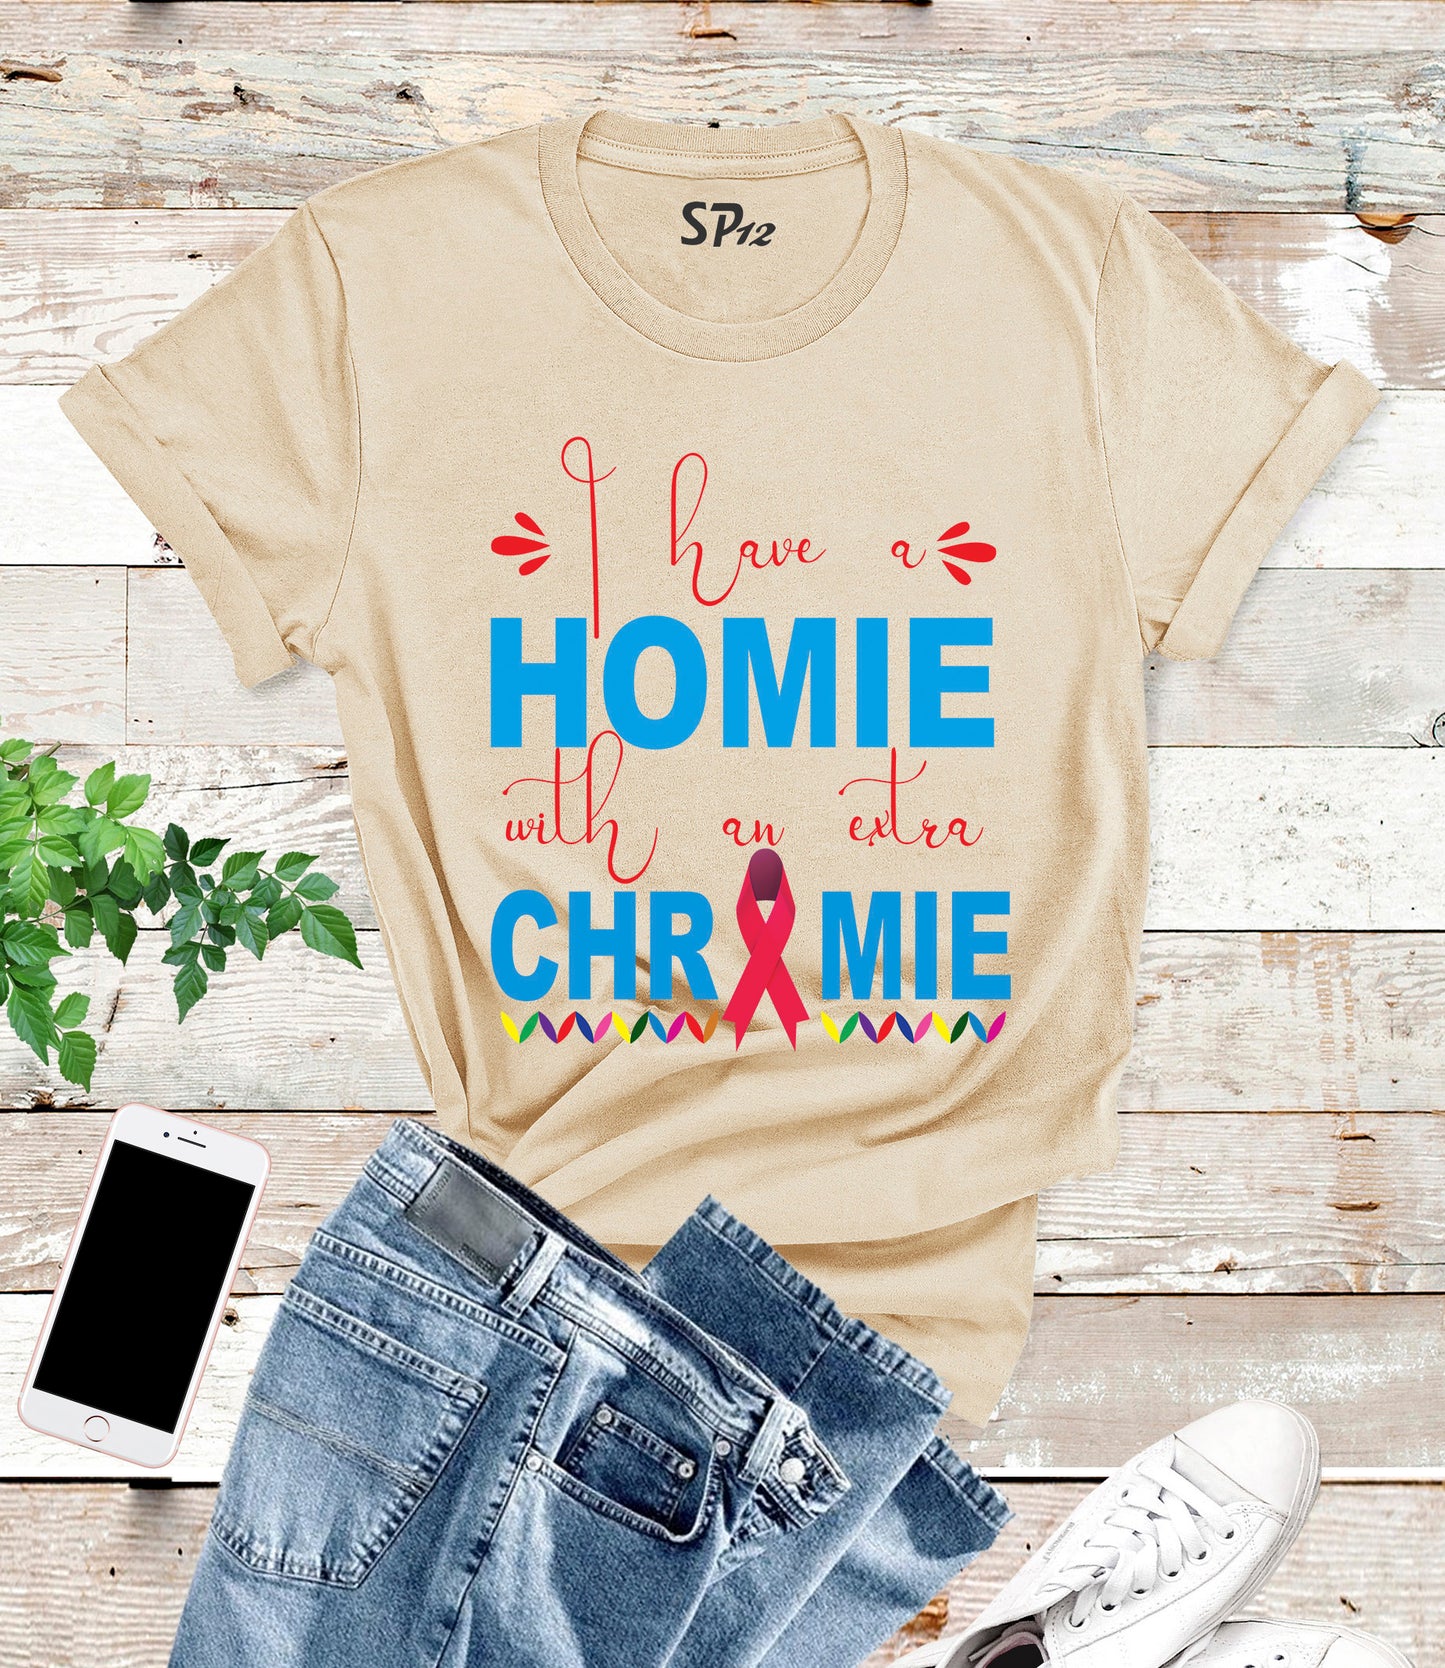 Homie Down Syndrome T-Shirt Down Syndrome Awareness Shirts